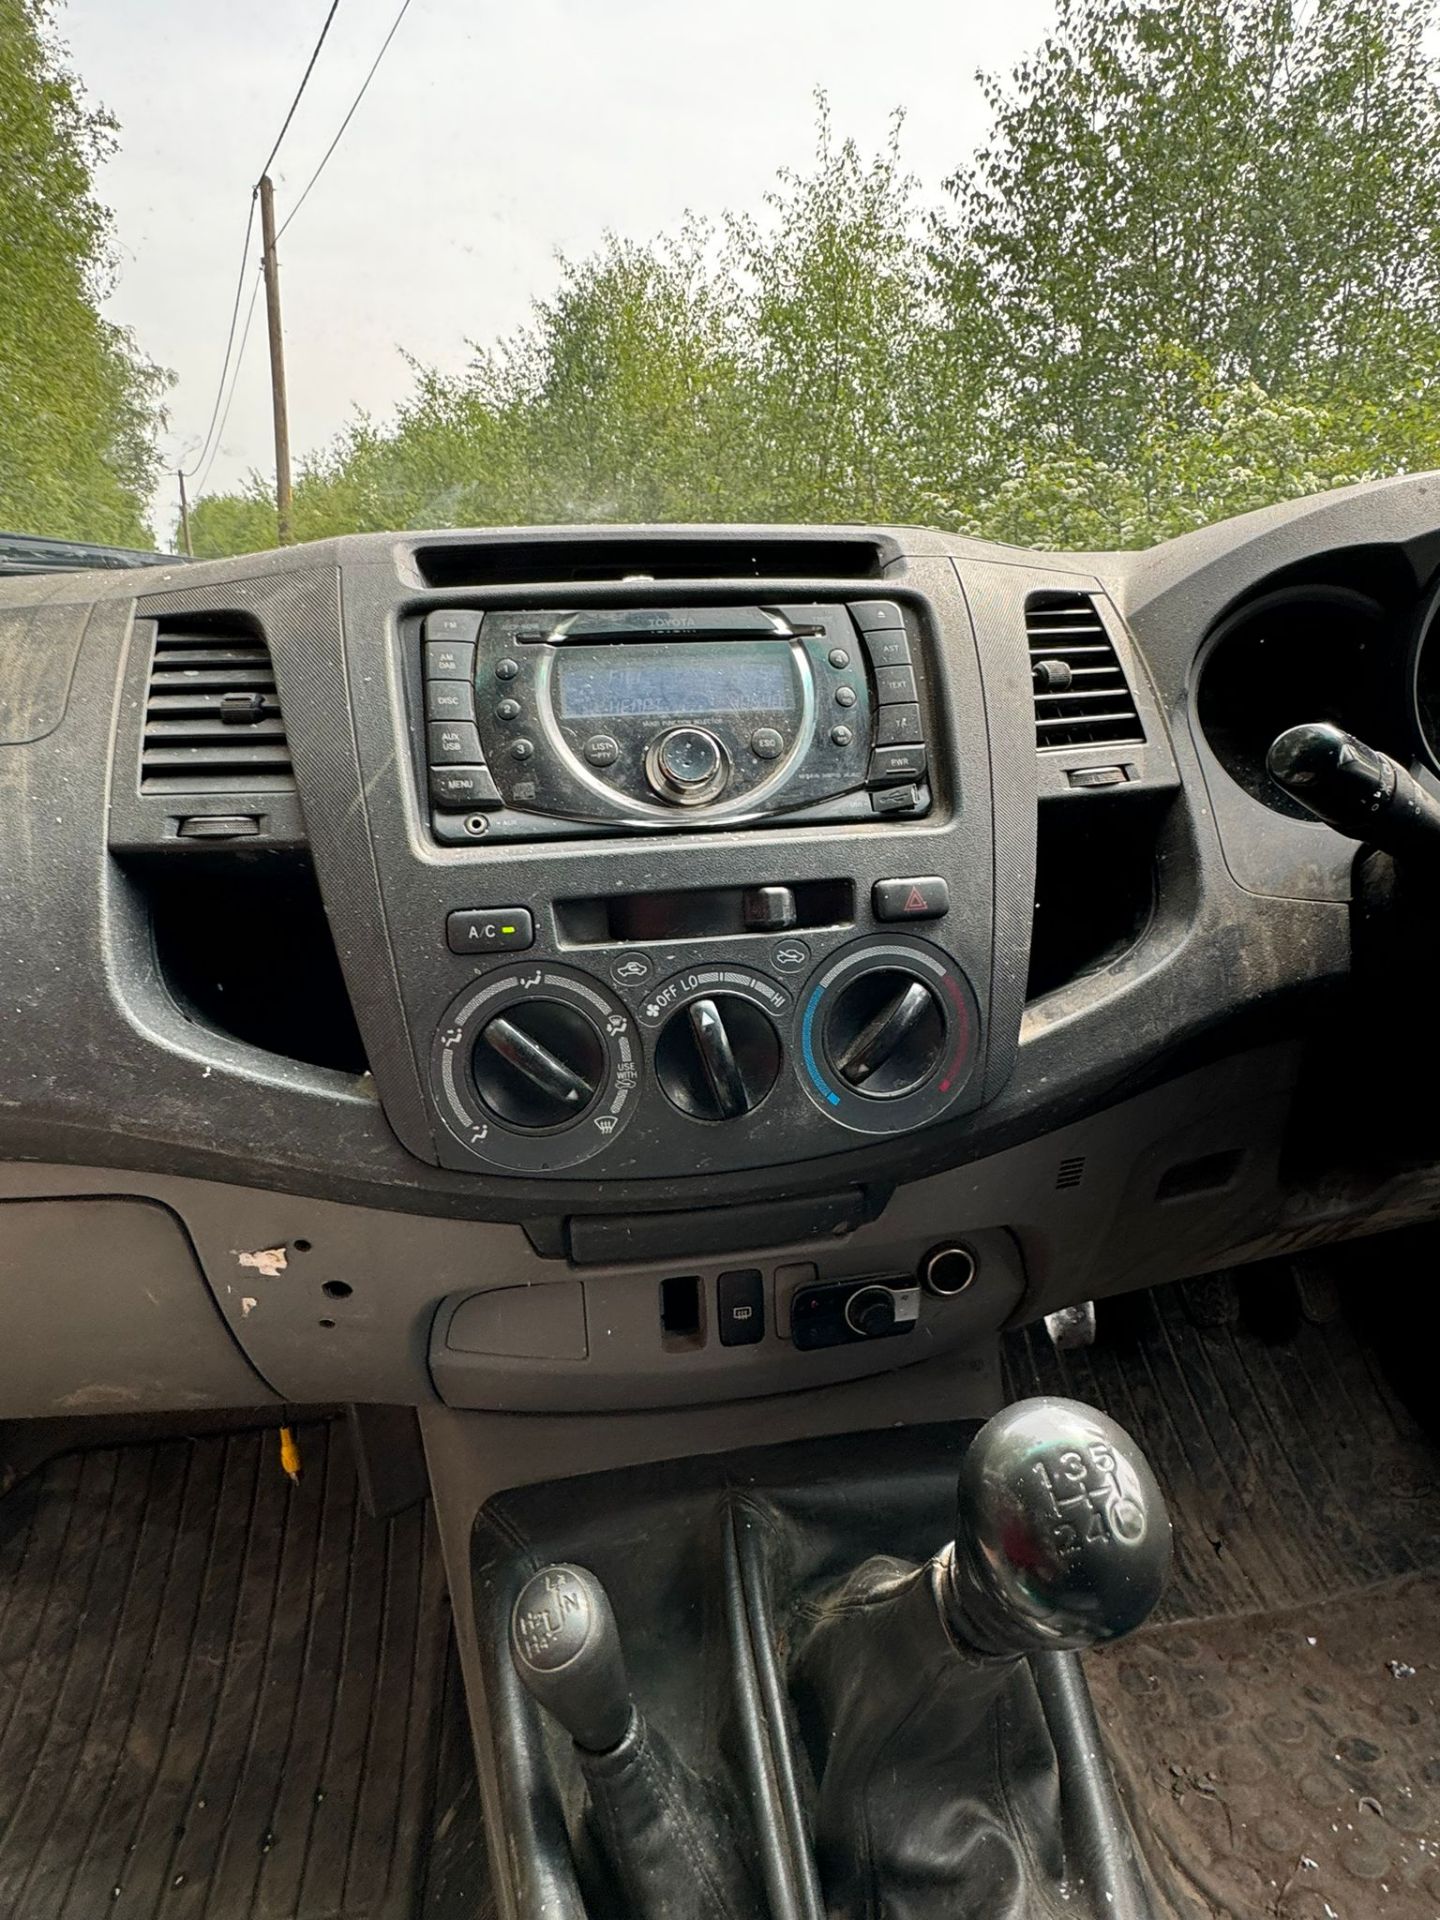 2010 TOYOTA HILUX KING CAB PICKUP TRUCK - READY FOR ANY ADVENTURE! - Image 13 of 15